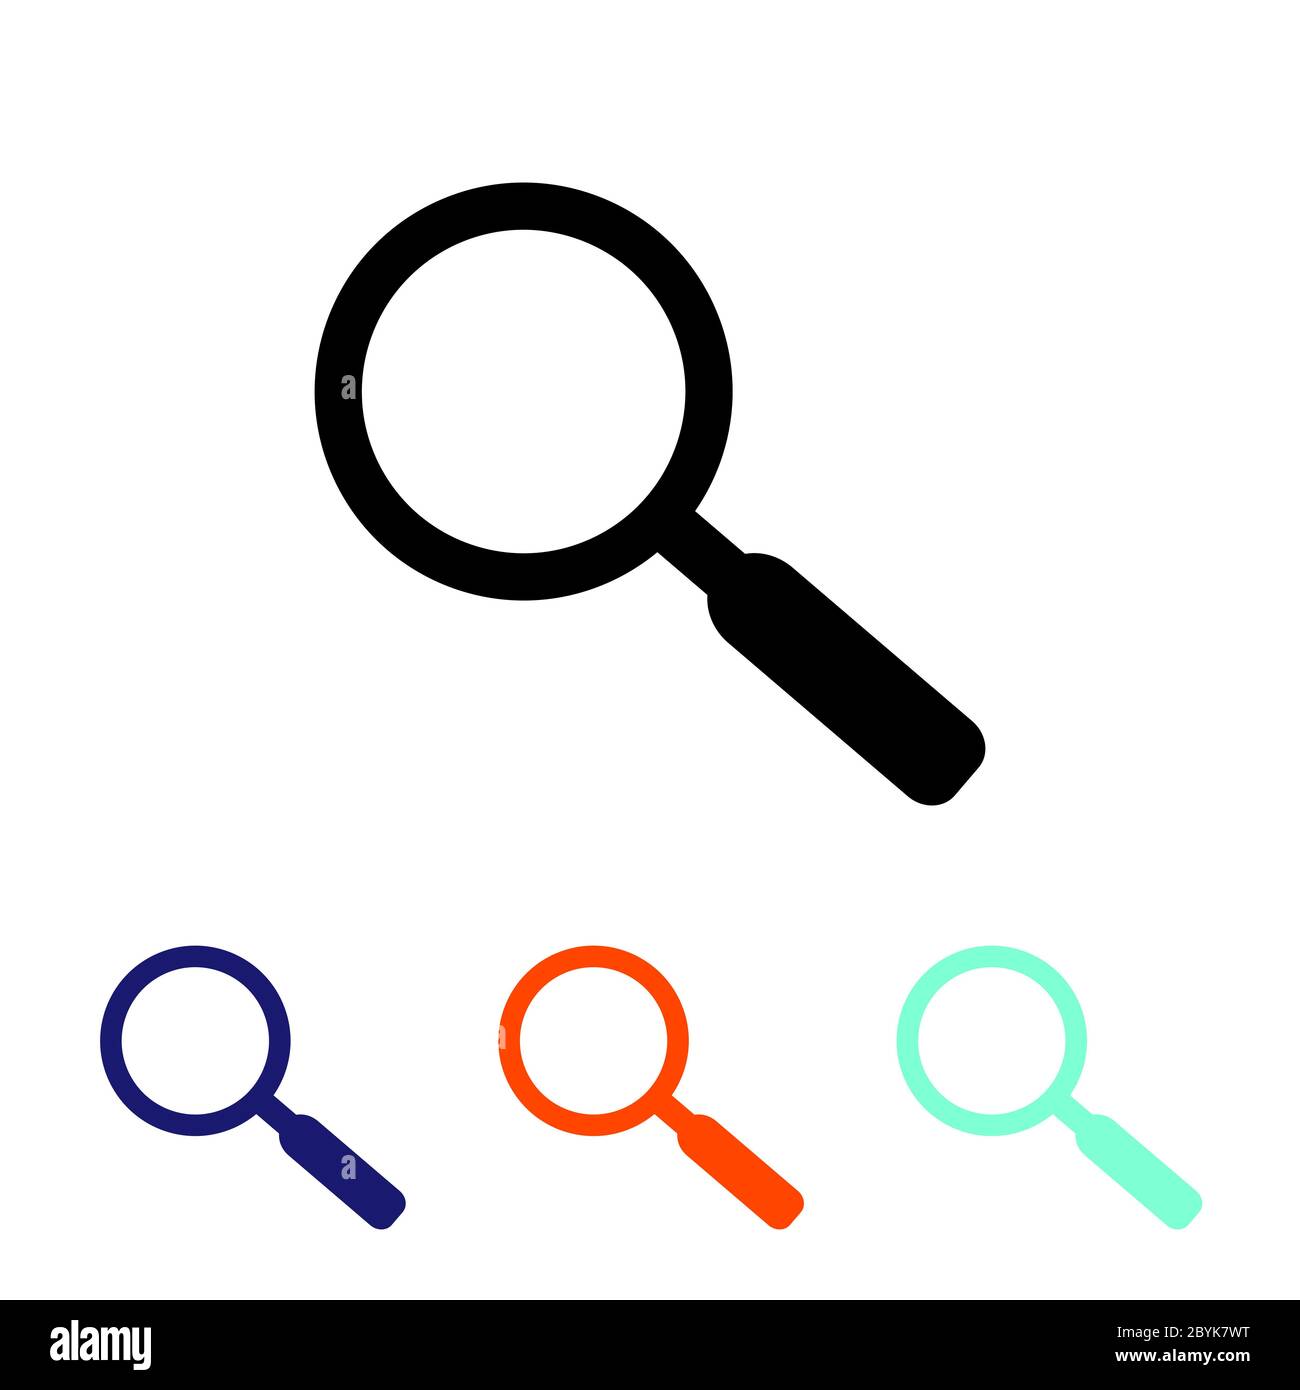 Search icon or magnifier icon in modern colour design concept on isolated white background. EPS 10 vector. Stock Vector